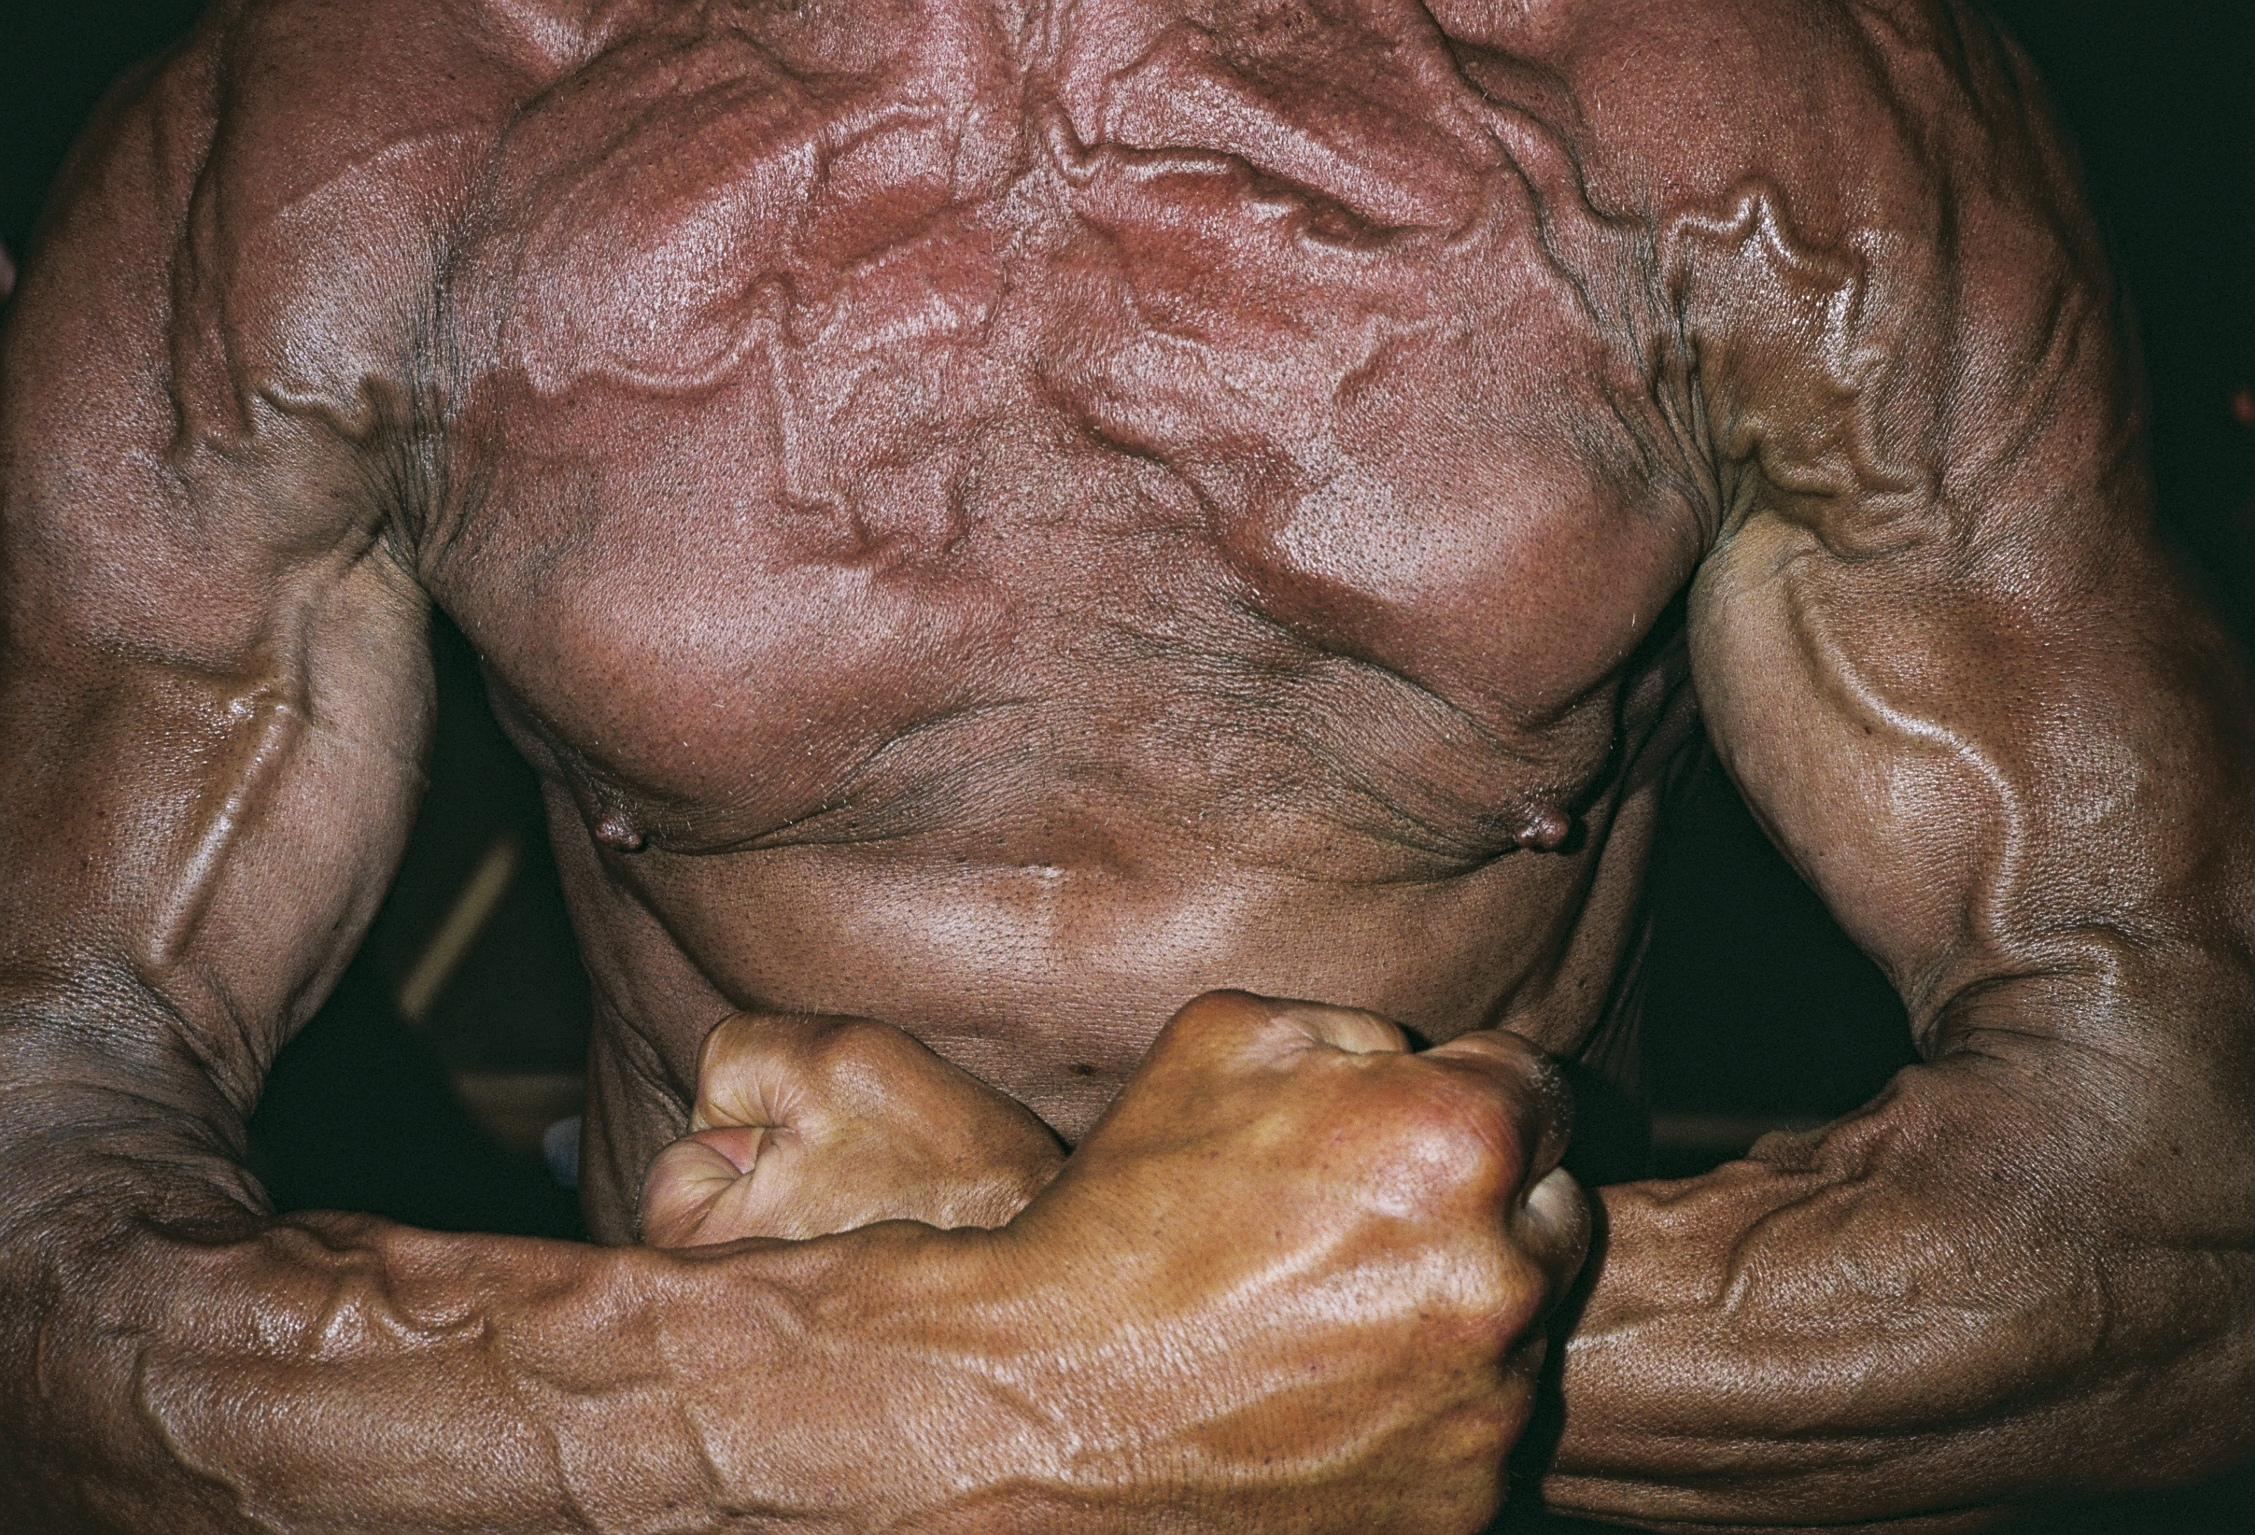 Nikolas-Petros Androbik, bodybuilding, photography - Close-up image of muscular and veined torso and arms, skin is extremely bronzed.